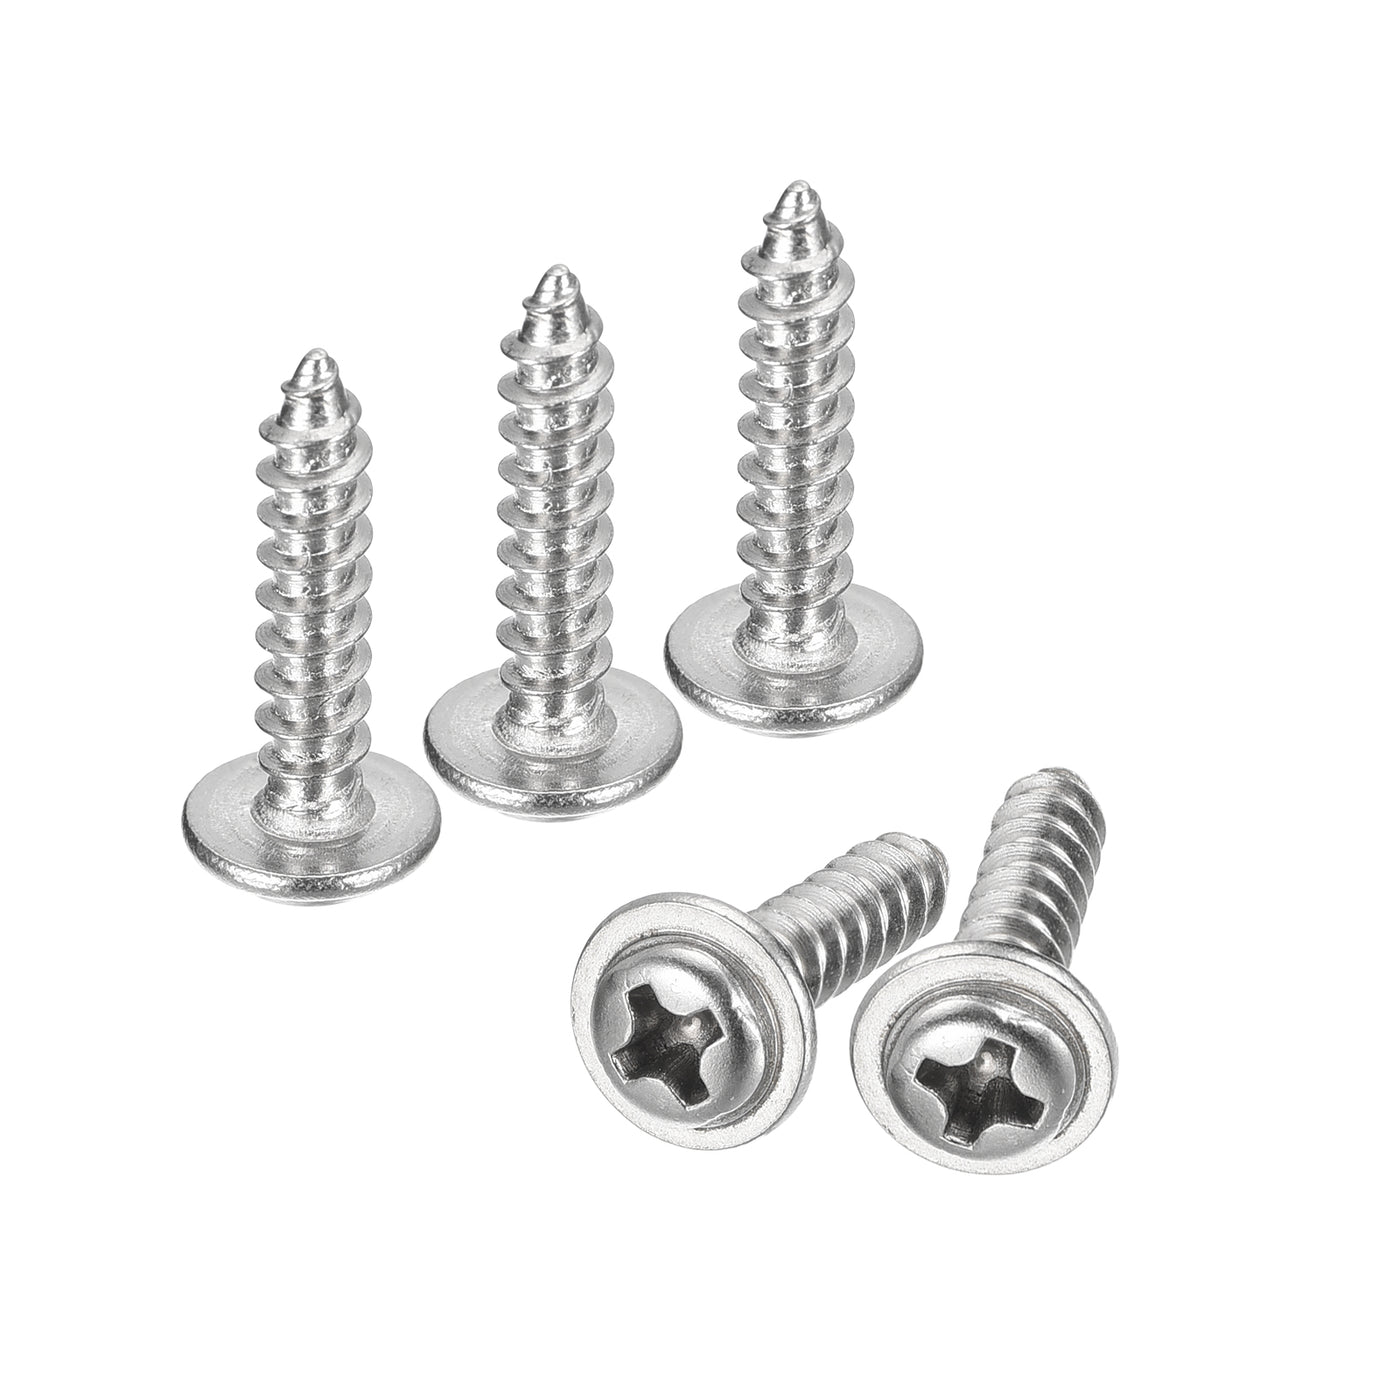 uxcell Uxcell ST3.5x16mm Phillips Pan Head Self-tapping Screw with Washer, 100pcs - 304 Stainless Steel Wood Screw Full Thread (Silver)